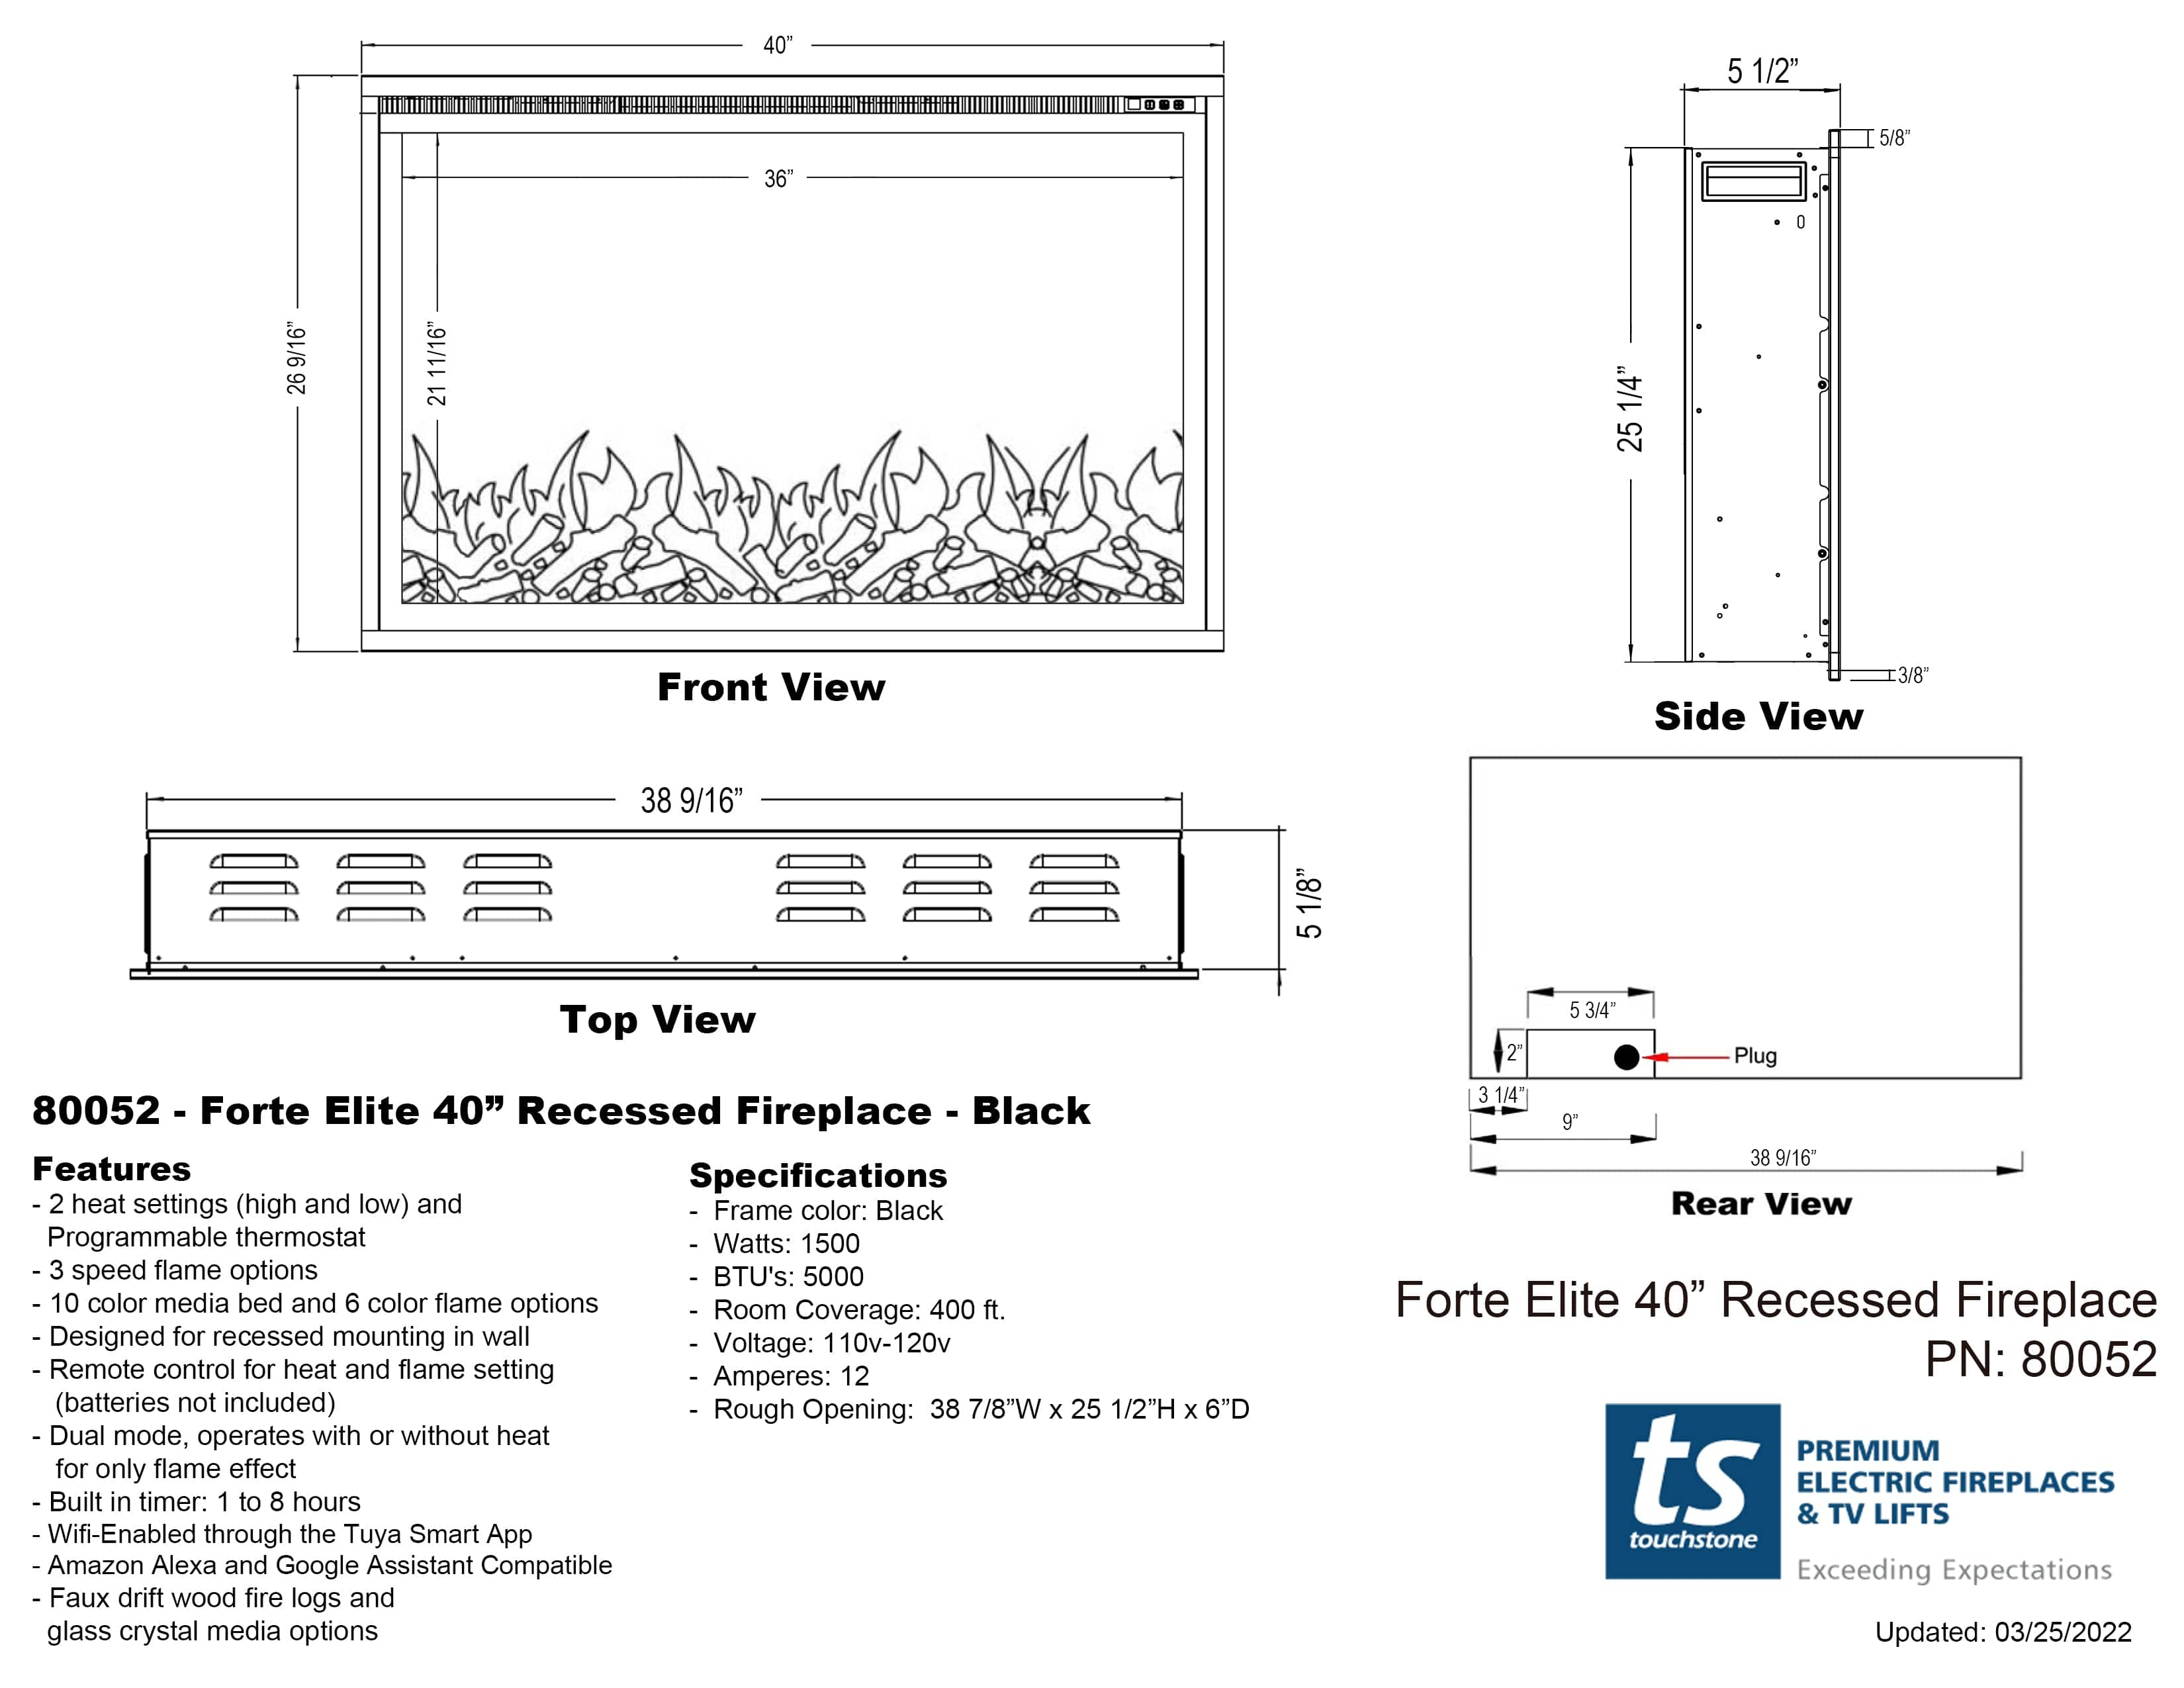 Touchstone Sideline Elite Forte 40 Electric Fireplace specifications